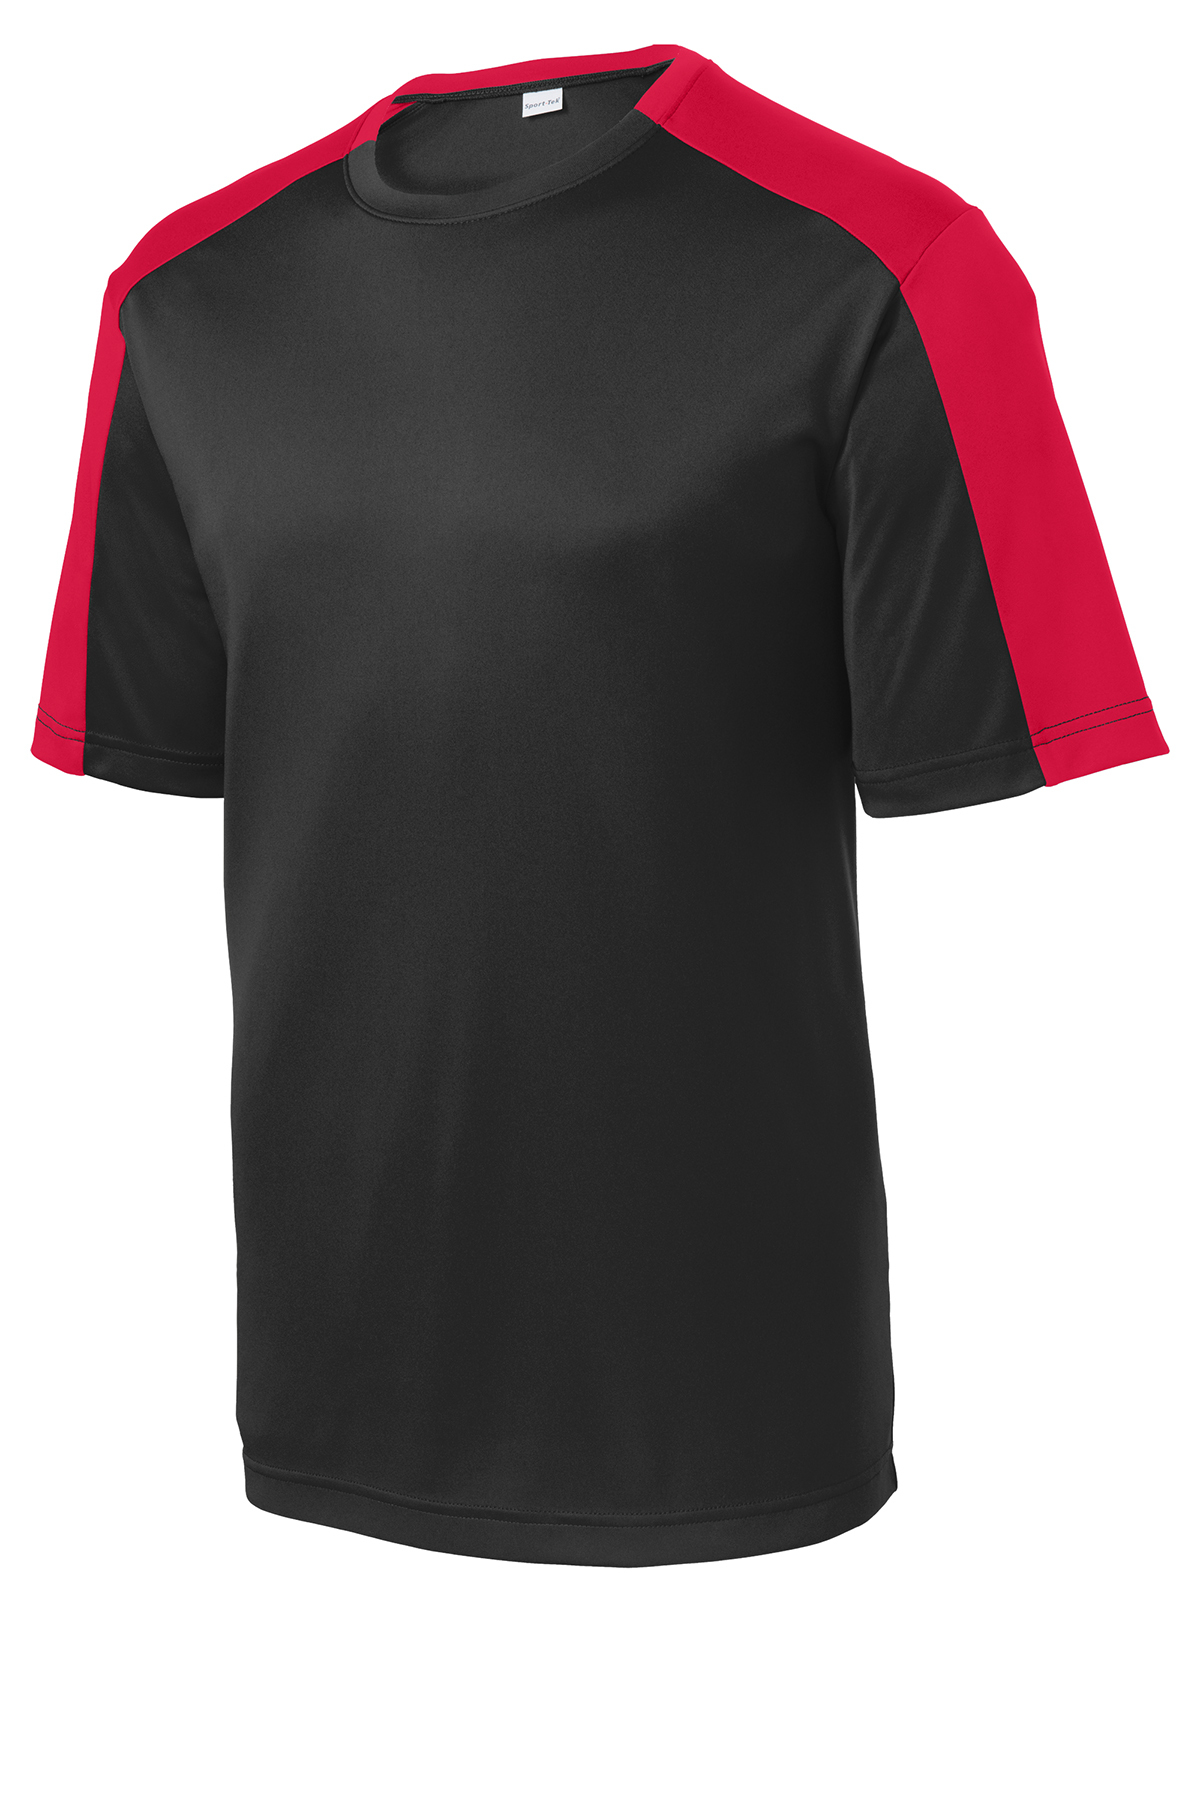 Sport-Tek PosiCharge Competitor Sleeve-Blocked Tee | Product | Company ...